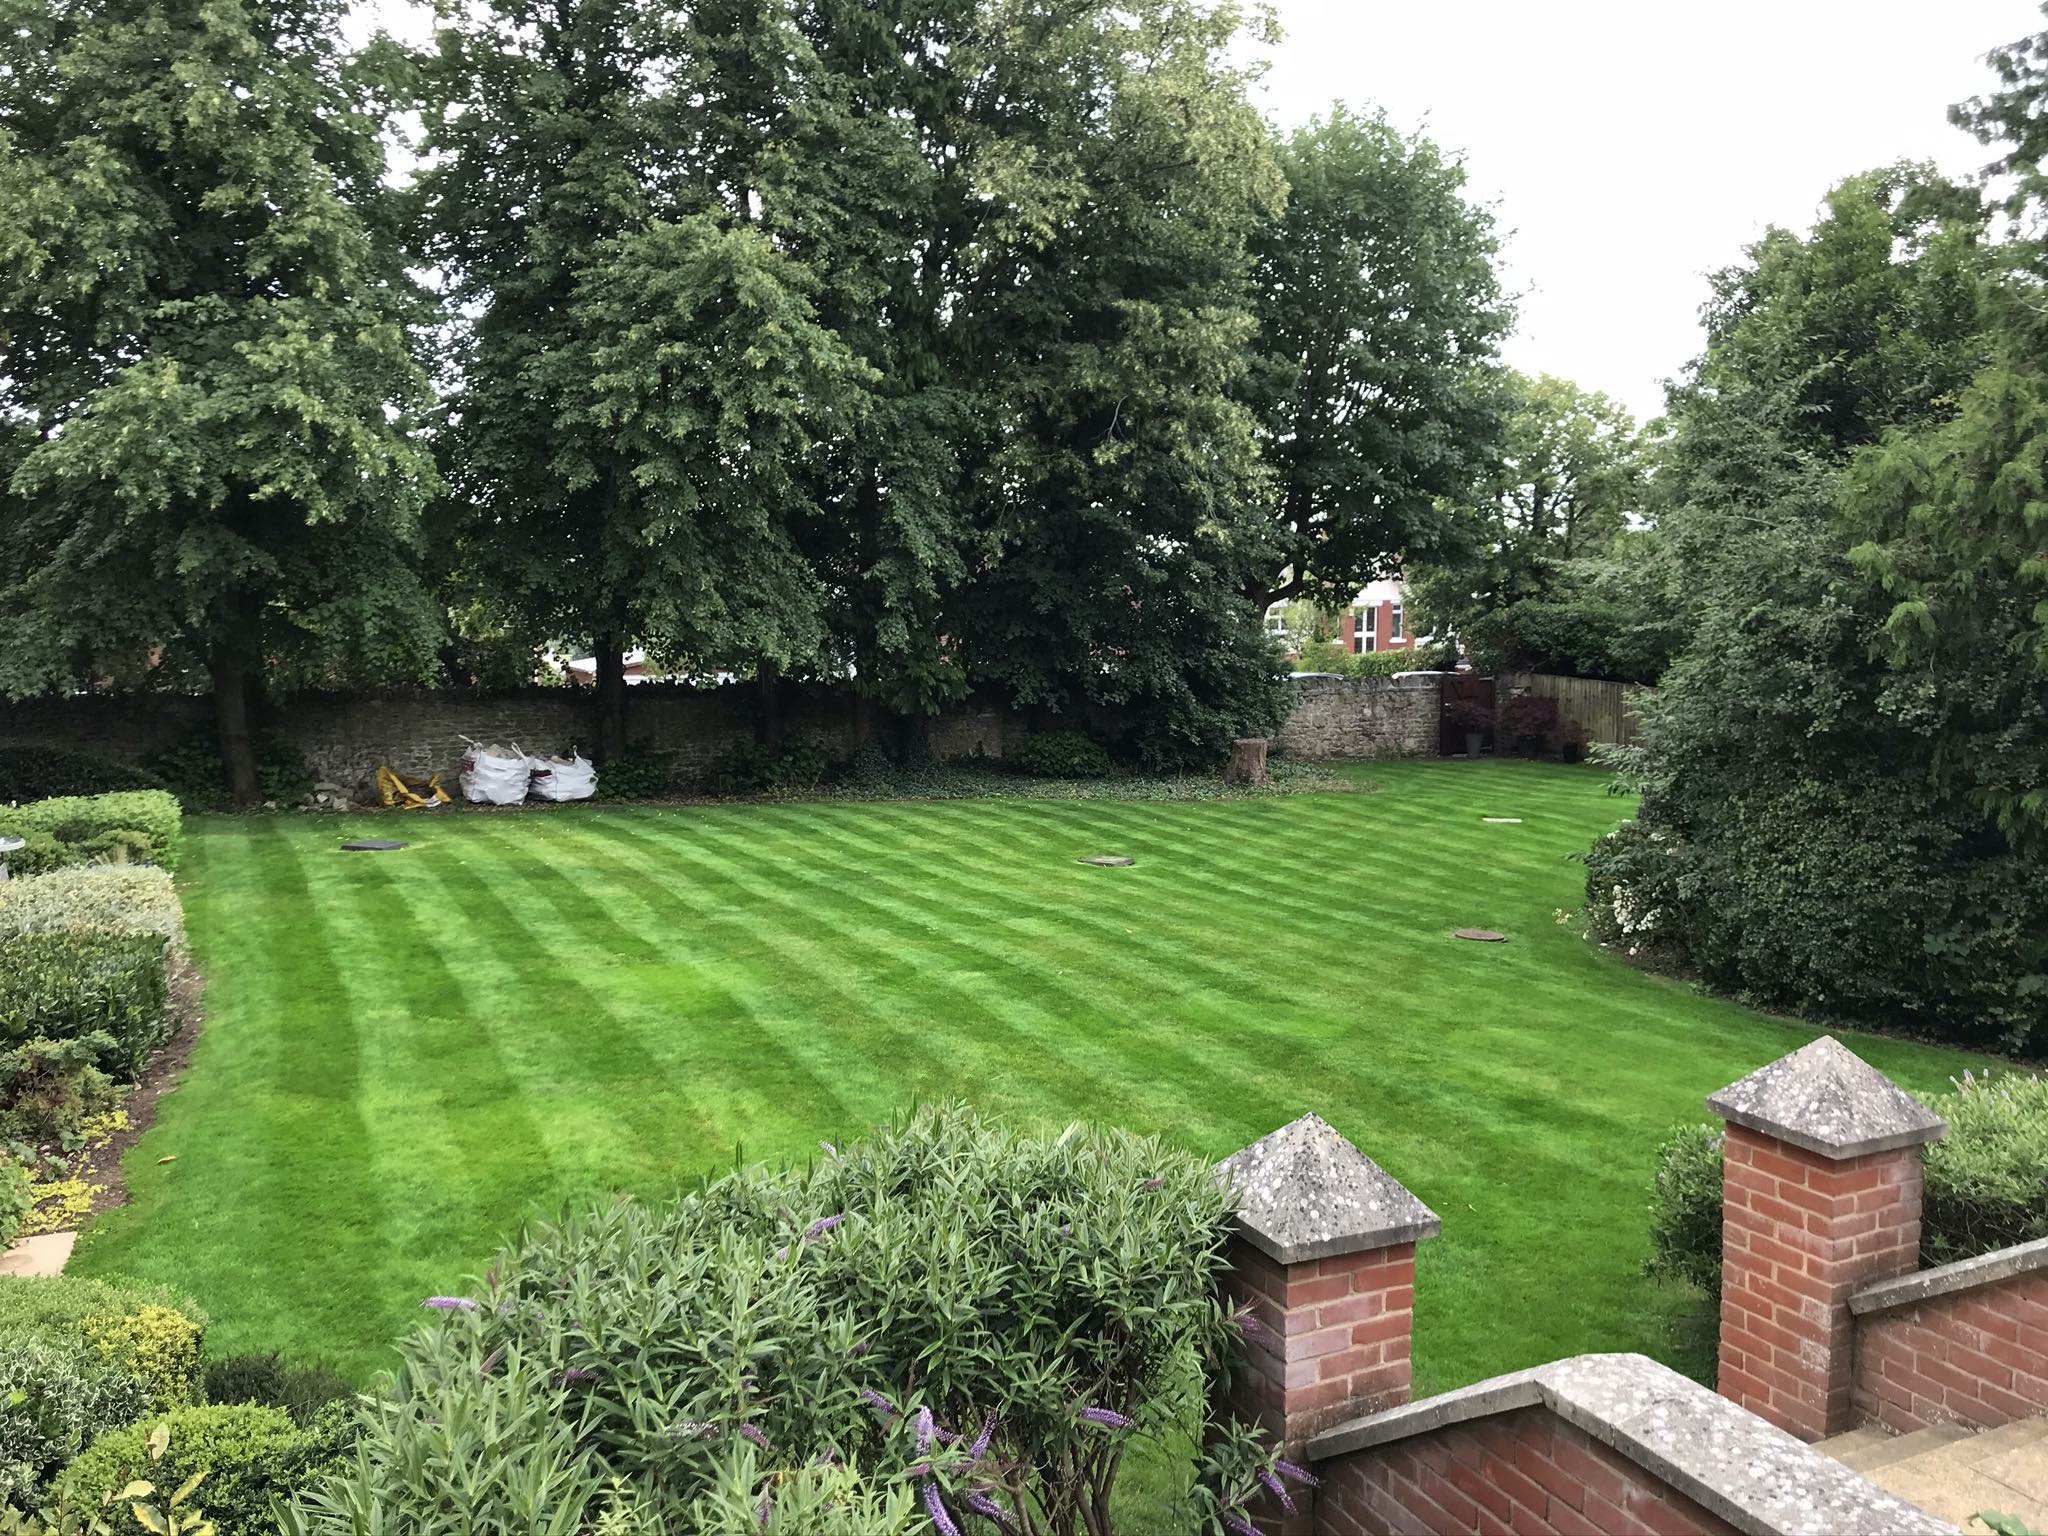 Westlecot House full health lawn after fertiliser treatment by Johnson Lawn Care